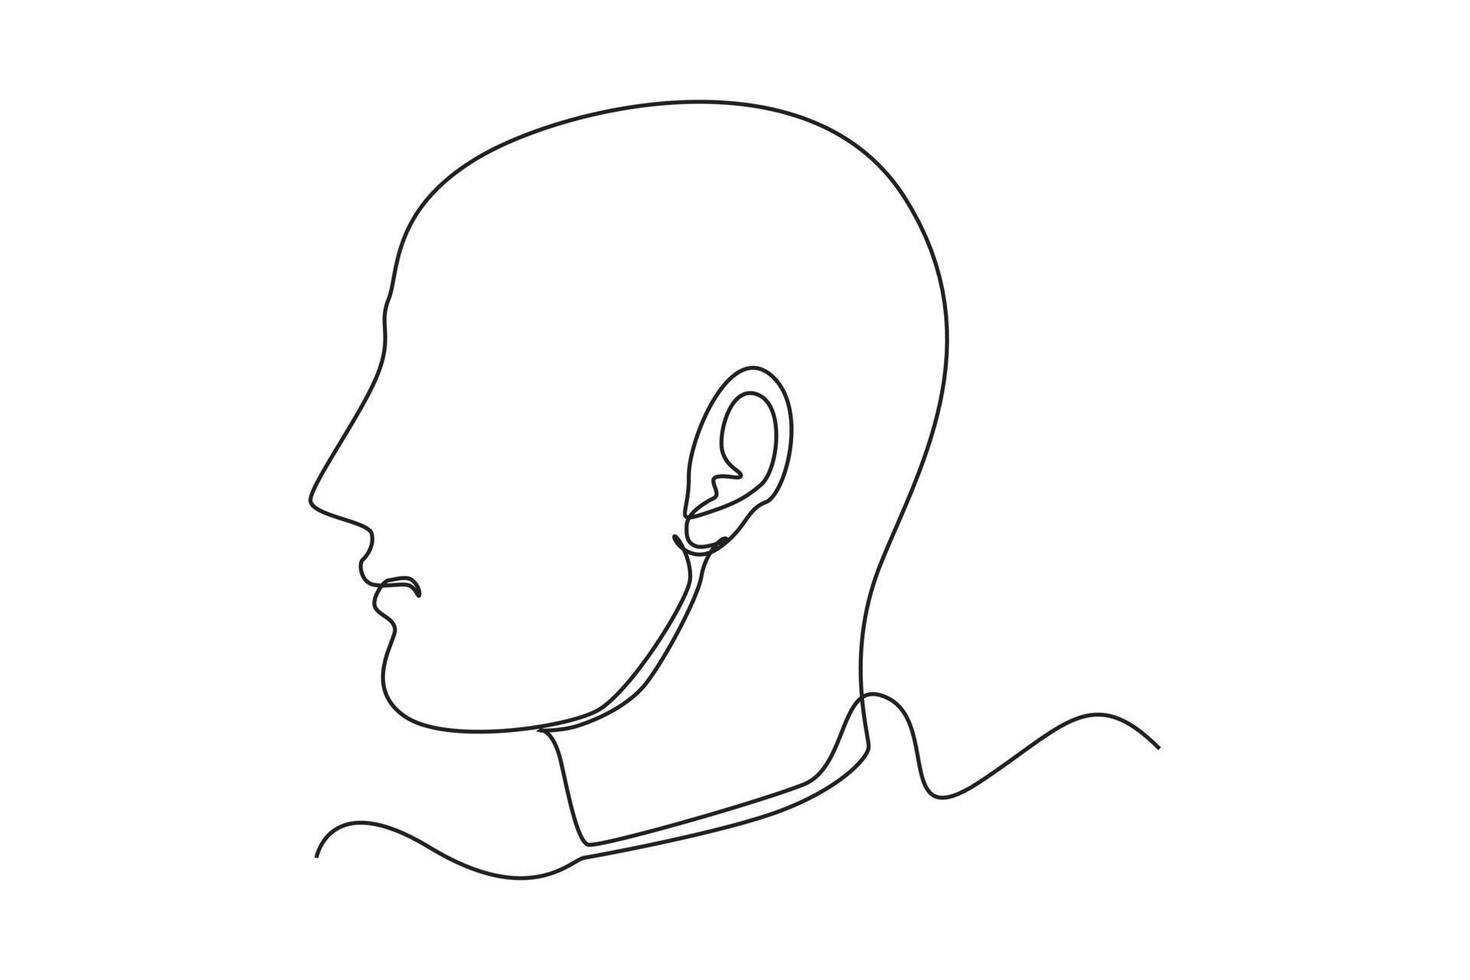 Single one line drawing human head anatomy. Human organ concept. Continuous line draw design graphic vector illustration.